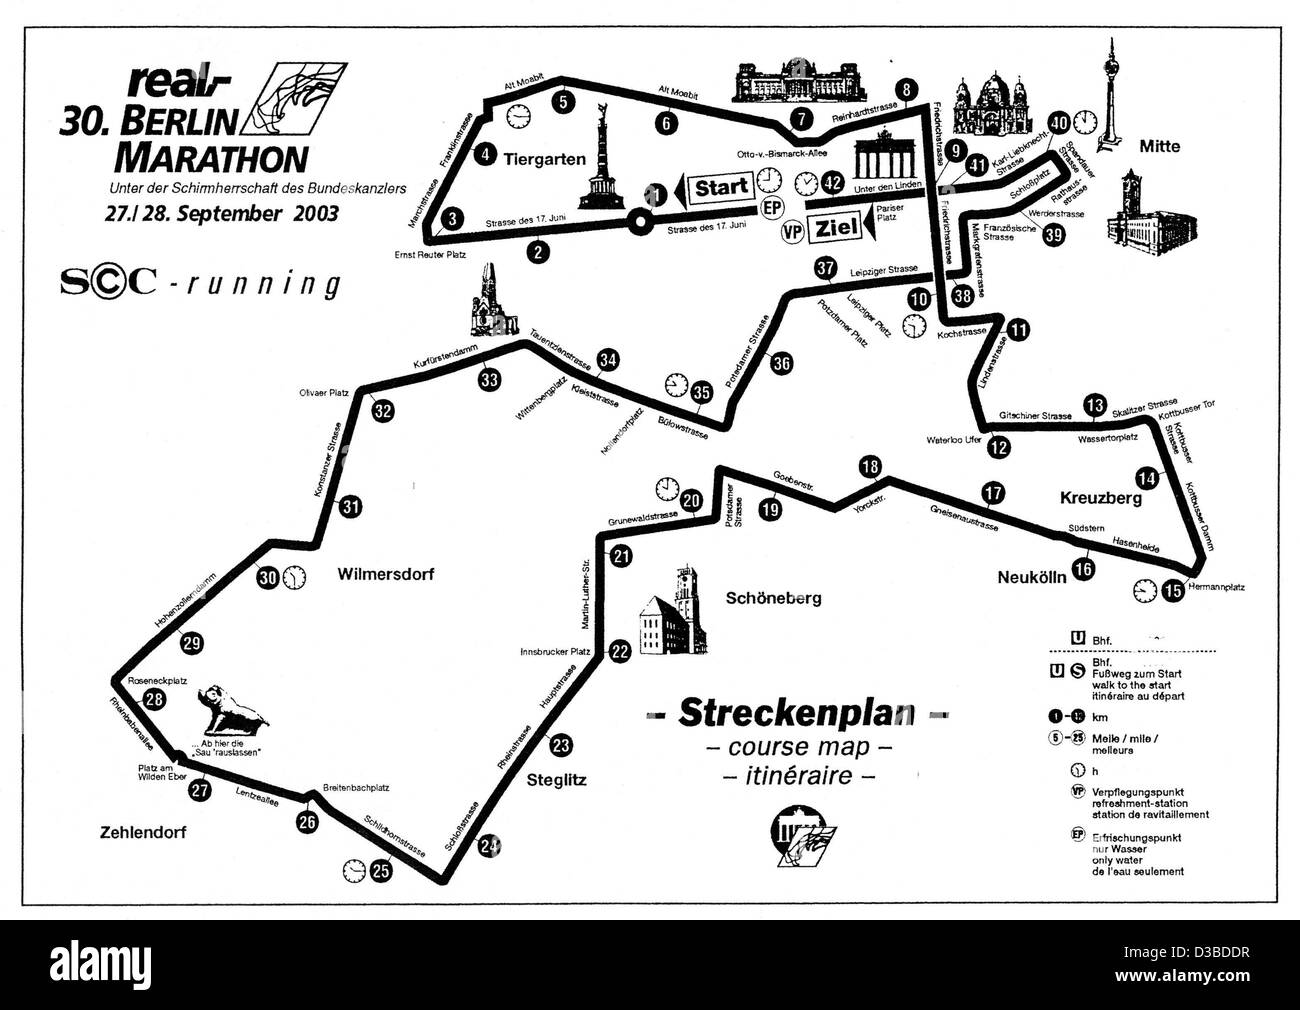 (dpa) - The sketch depicts the marathon route for the 30th Berlin marathon, which will take place in downtown Berlin on 27 and 28 September 2003.  The race will start near the Siegessaeule (victory column) and finish near the Brandenburg Gate.  For the first time, the race will be held over the cour Stock Photo